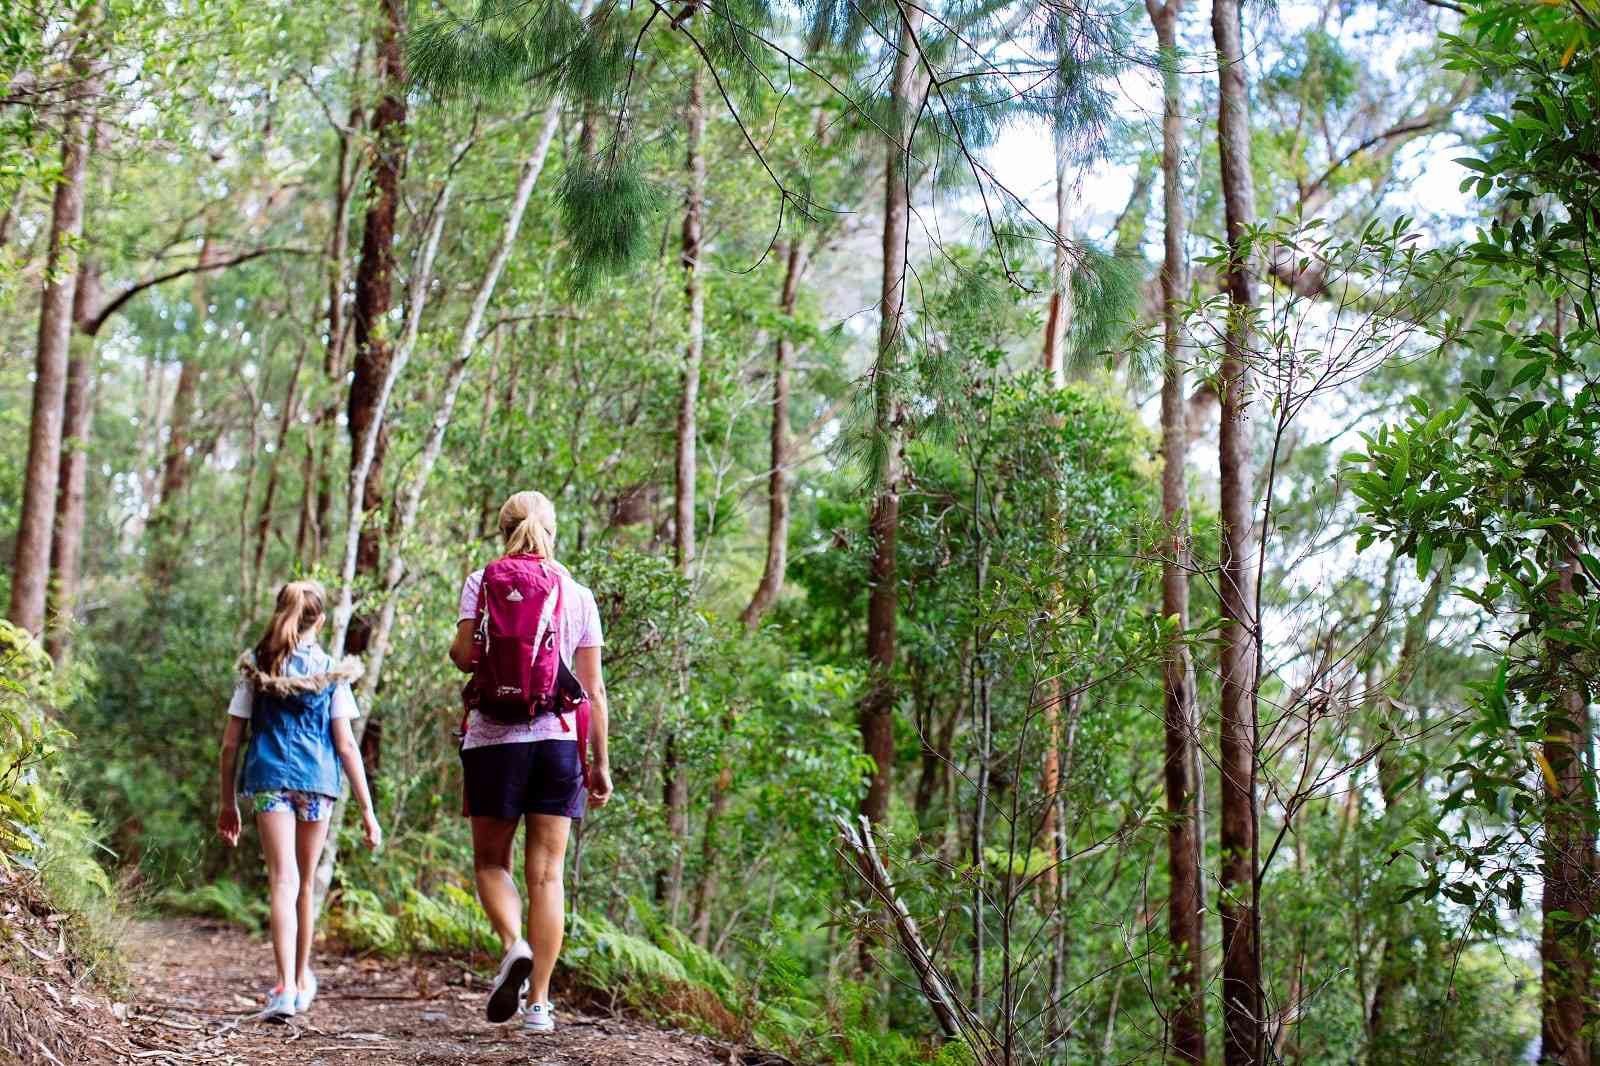 Get Outdoors With These Top Gold Coast Bushwalking Tracks